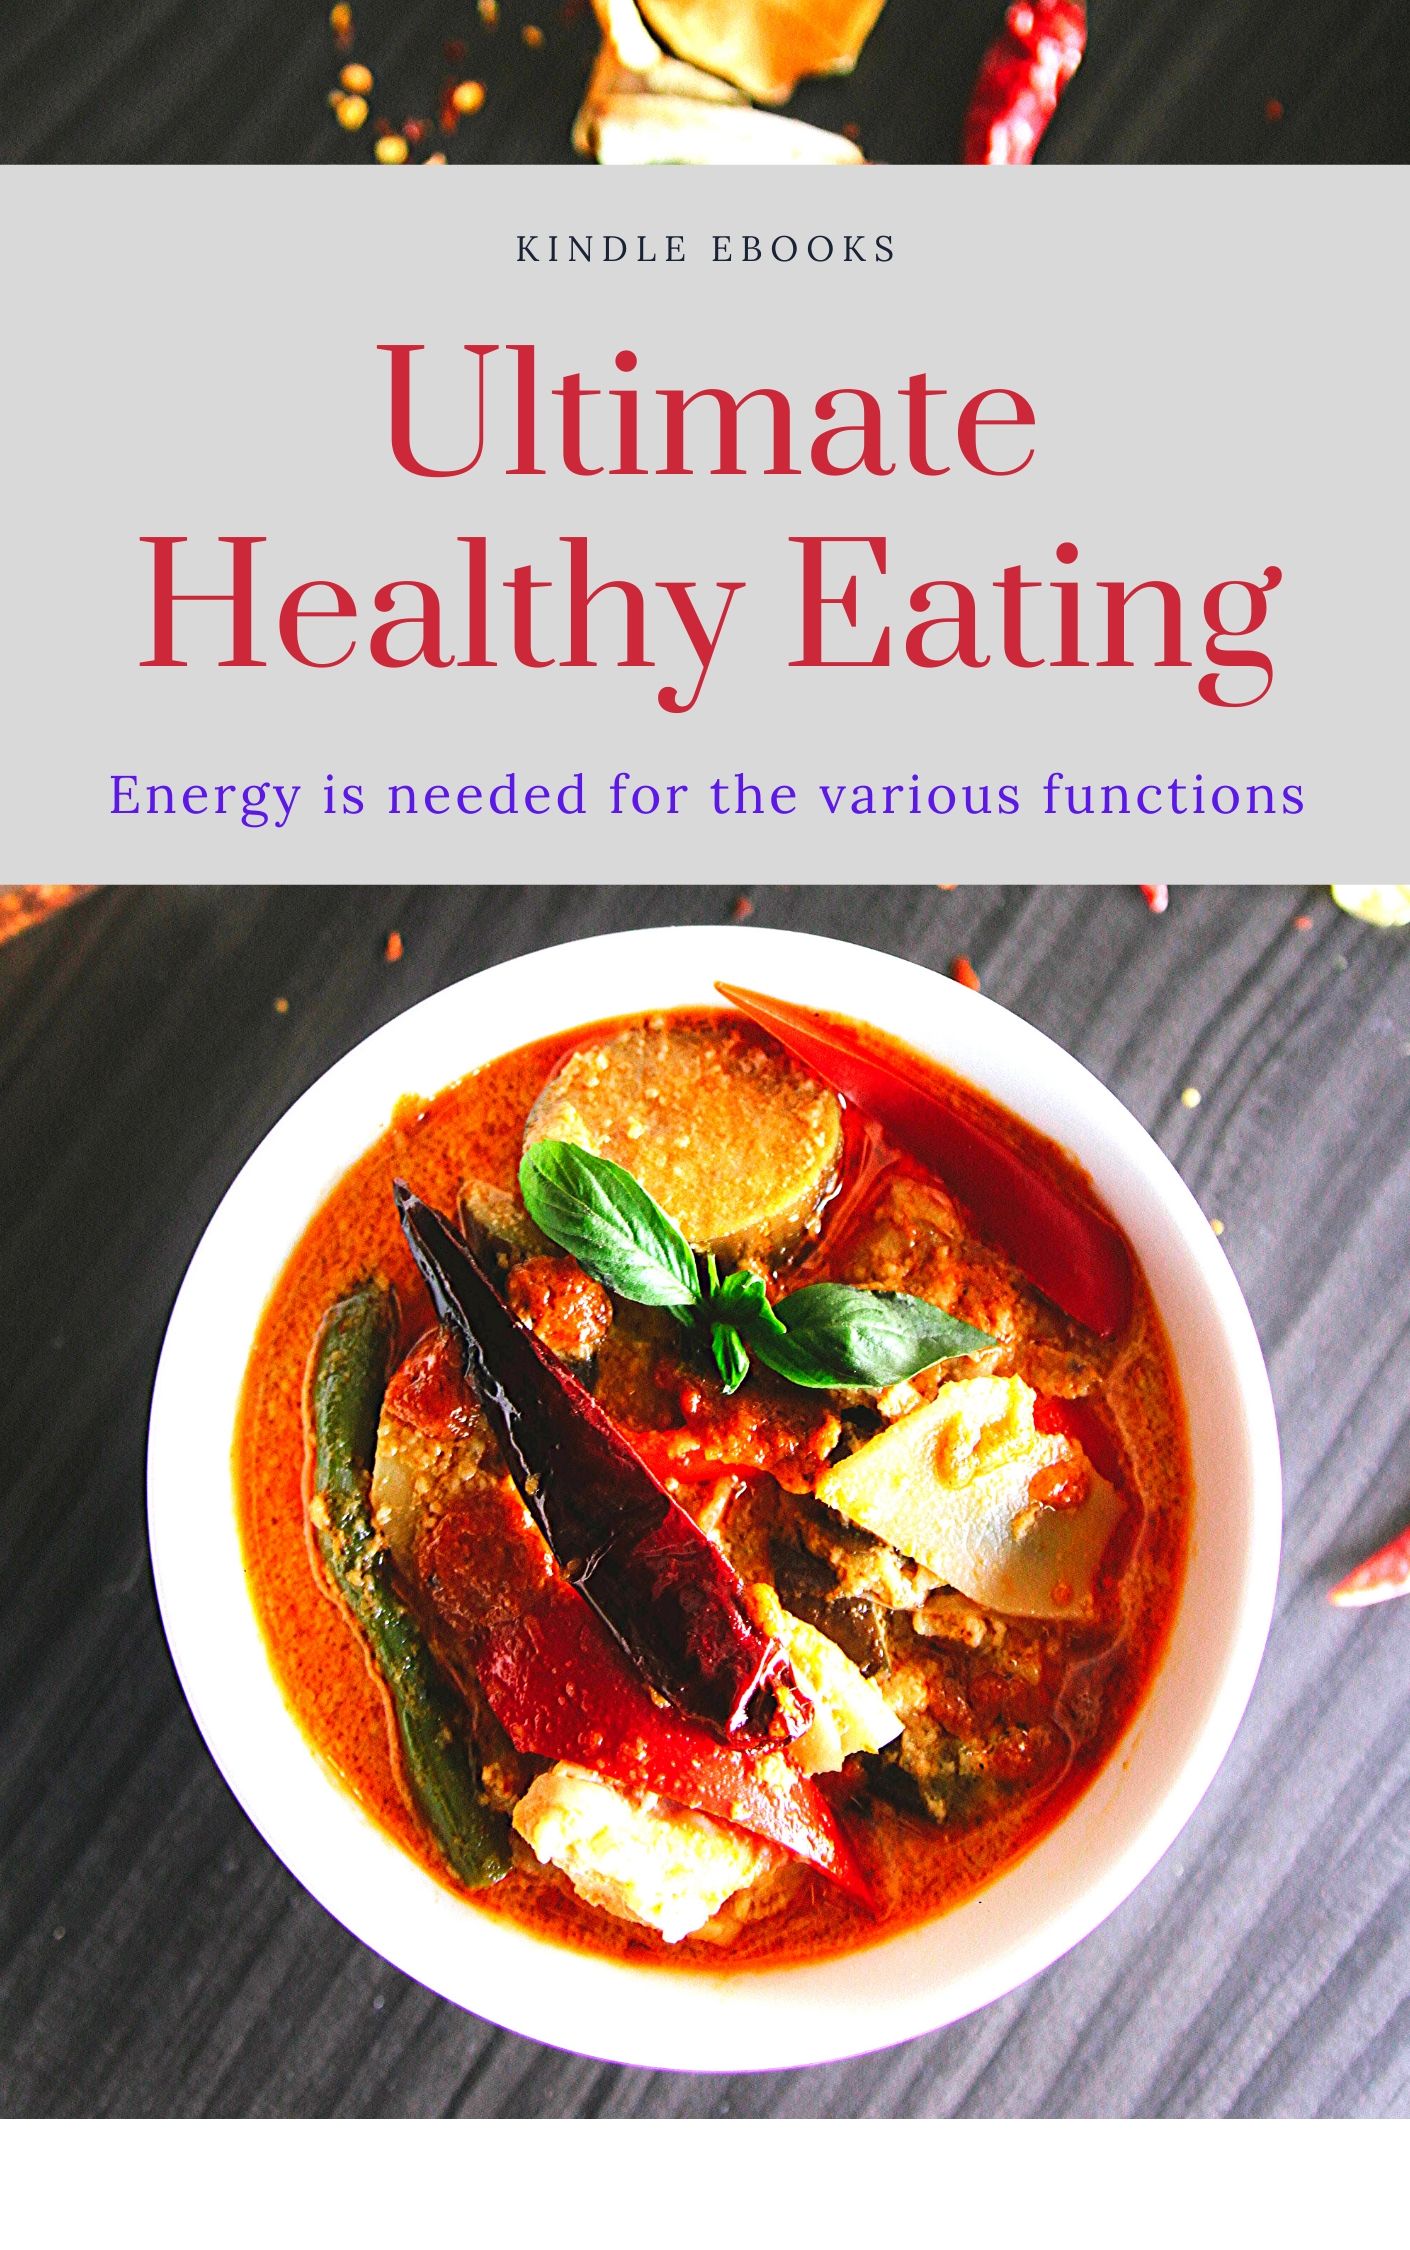 FREE: Best Eating Healthy Tips You Will Read This Year: Cooking Light by Zain